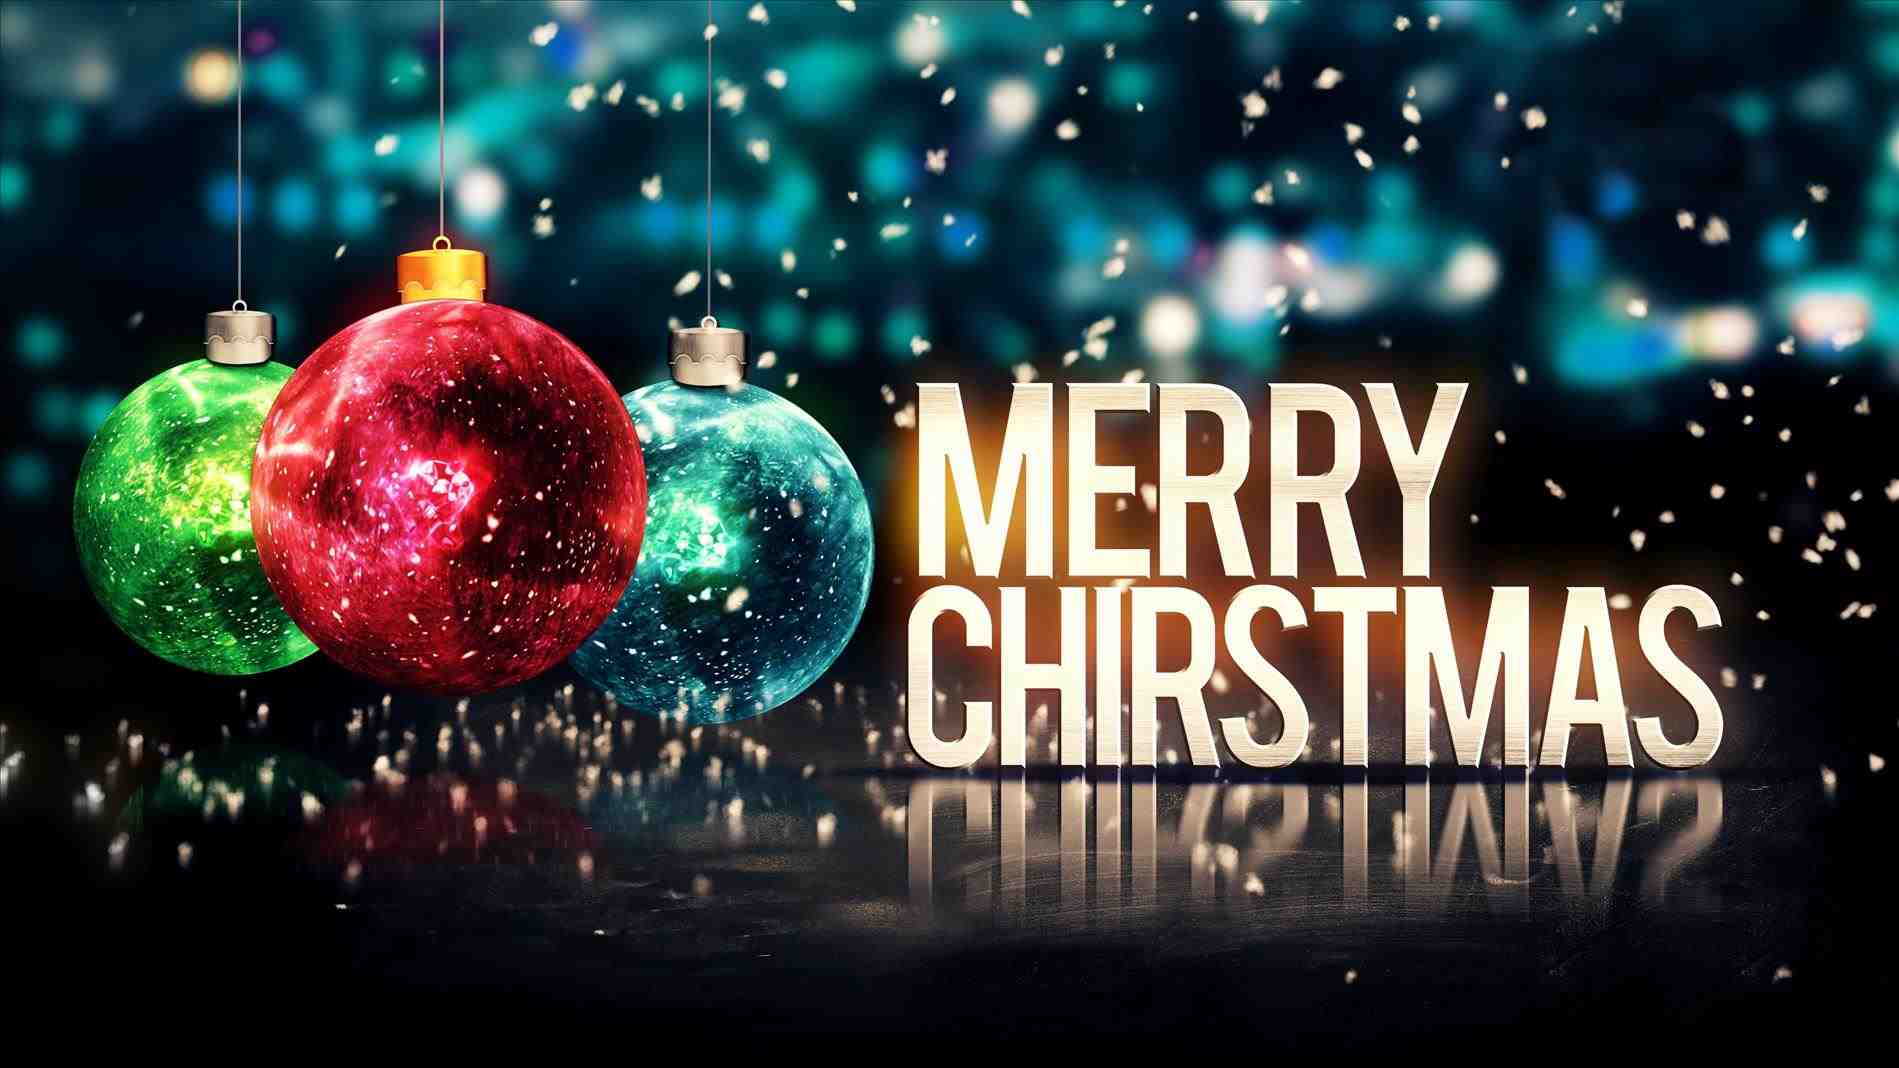 Happy Christmas Free Hd Wallpapers 2018 Download